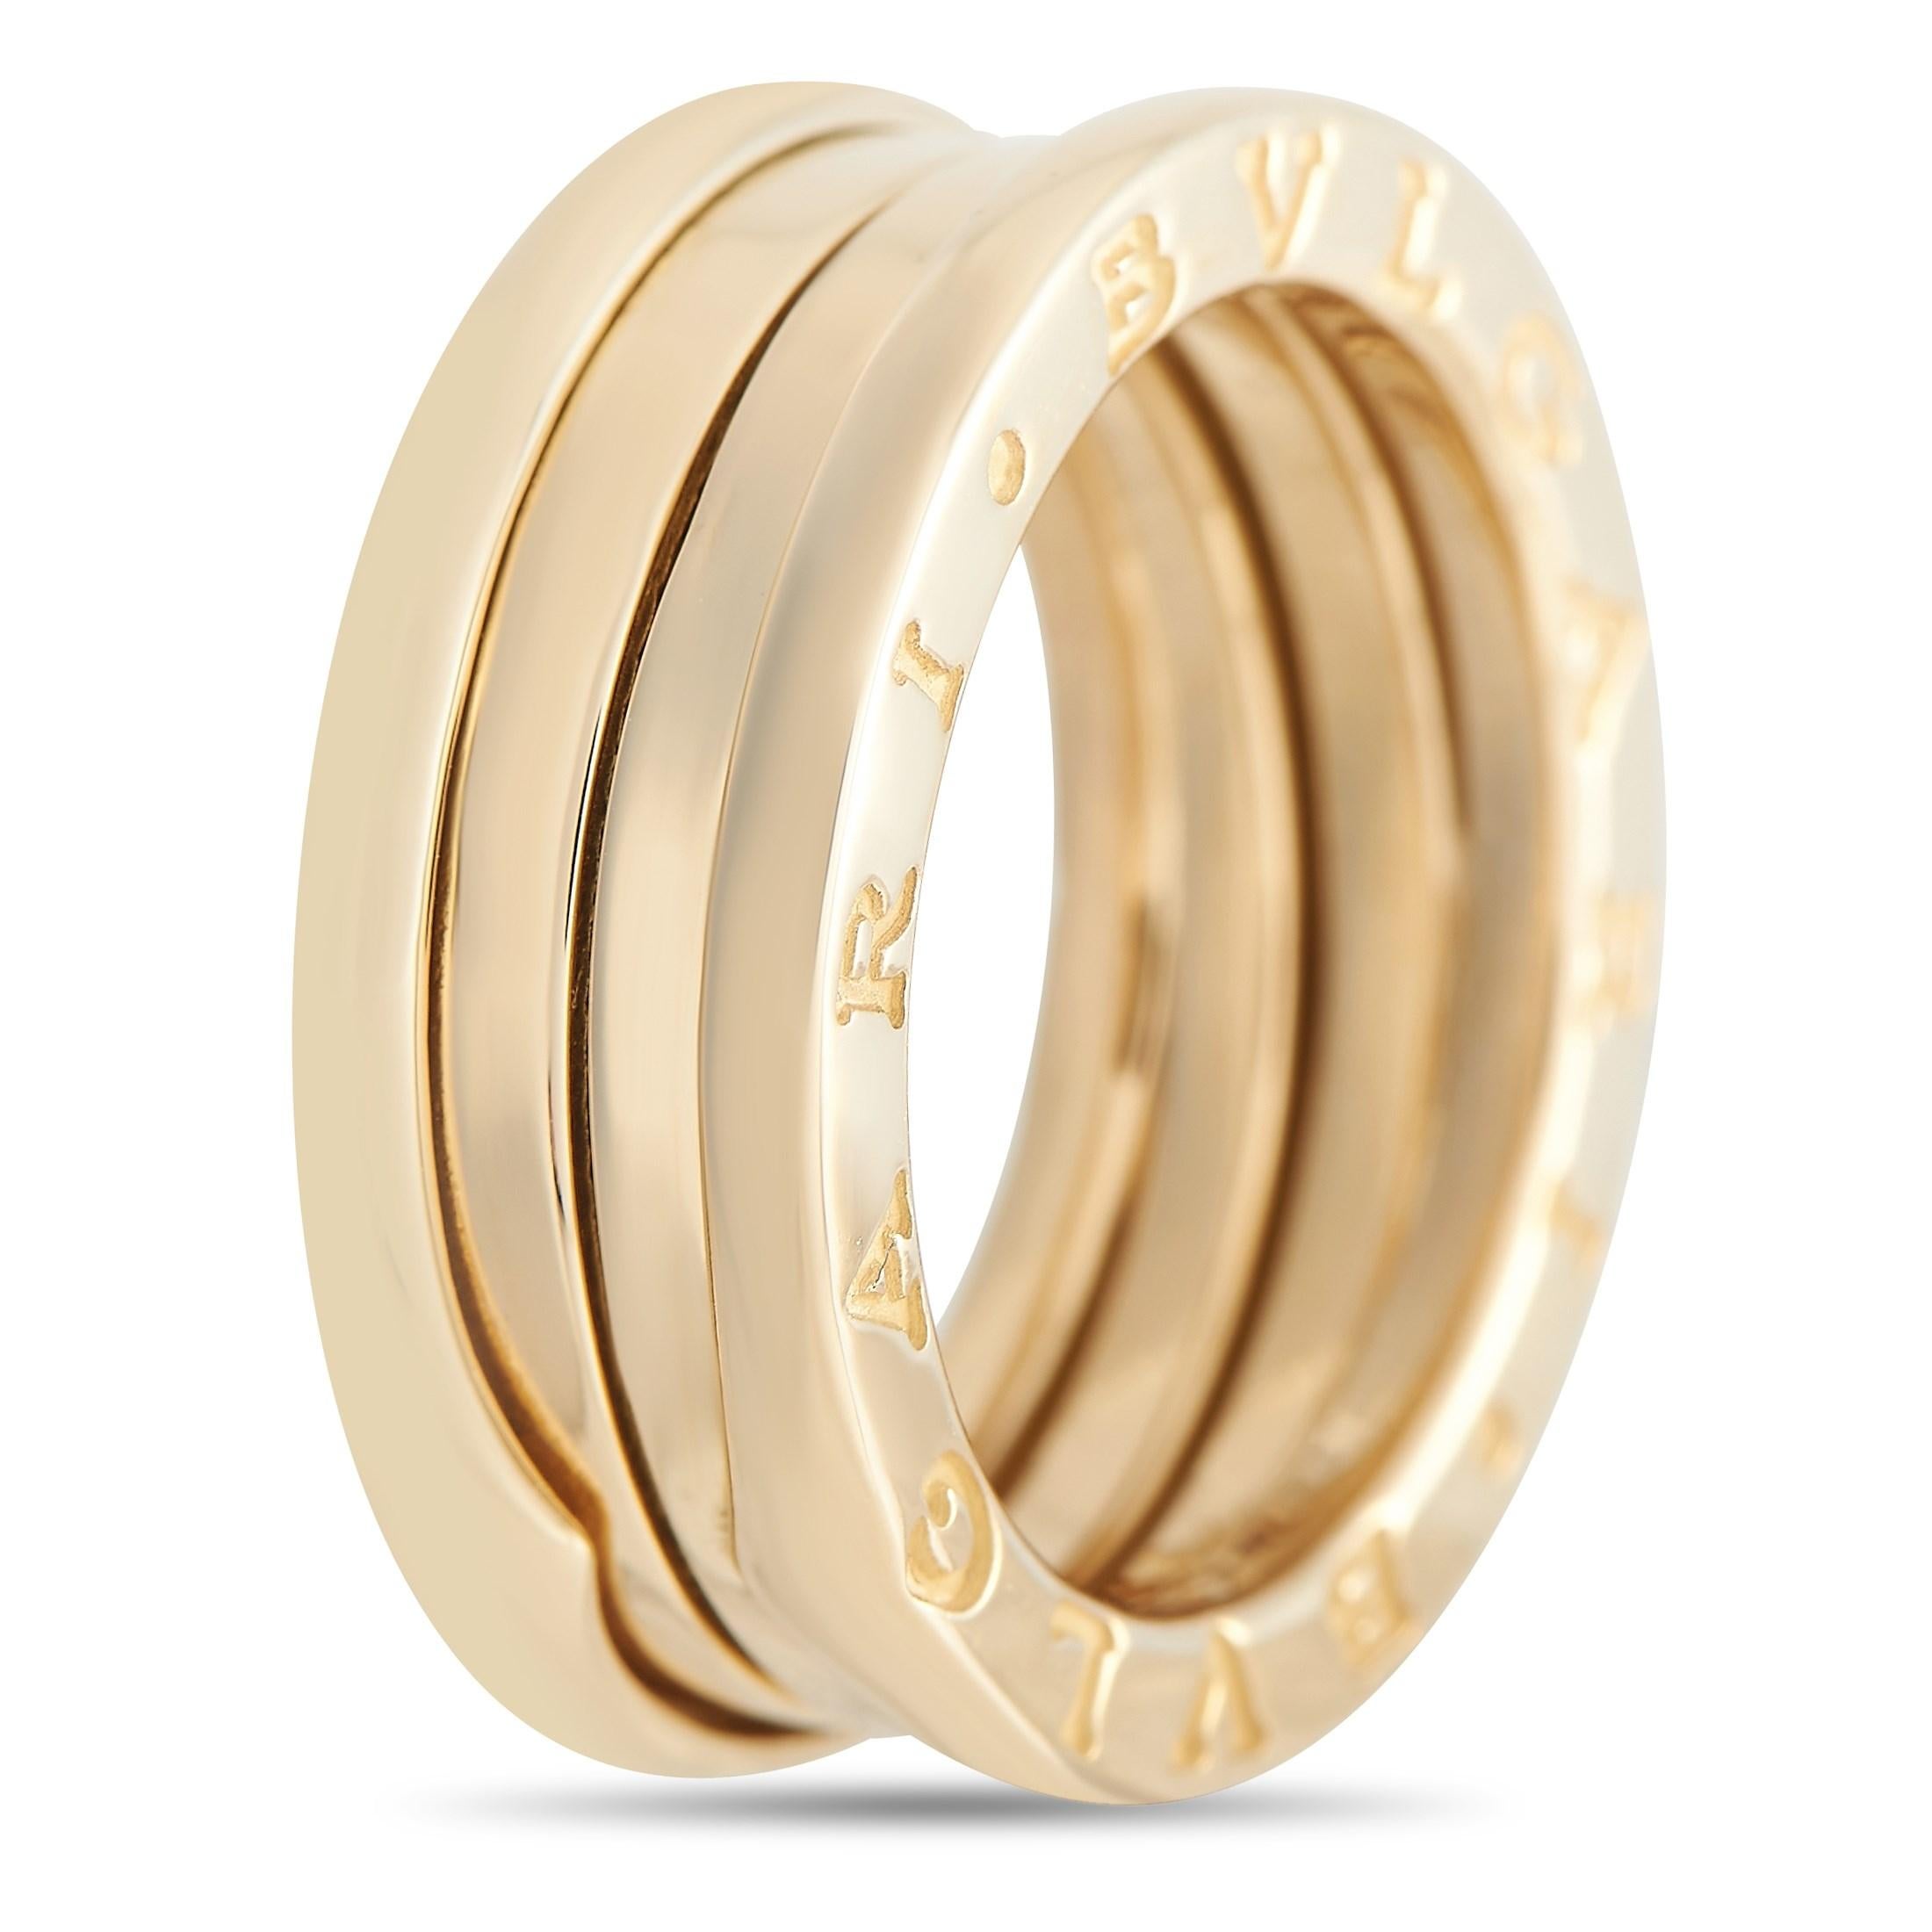 Embodying both masculinity and femininity, the B.zero1 ring from Bvlgari makes a statement with its simple yet innovative design. Inspired by the imposing look of the historic Colosseum, this ring sure deserves to be considered an icon. This